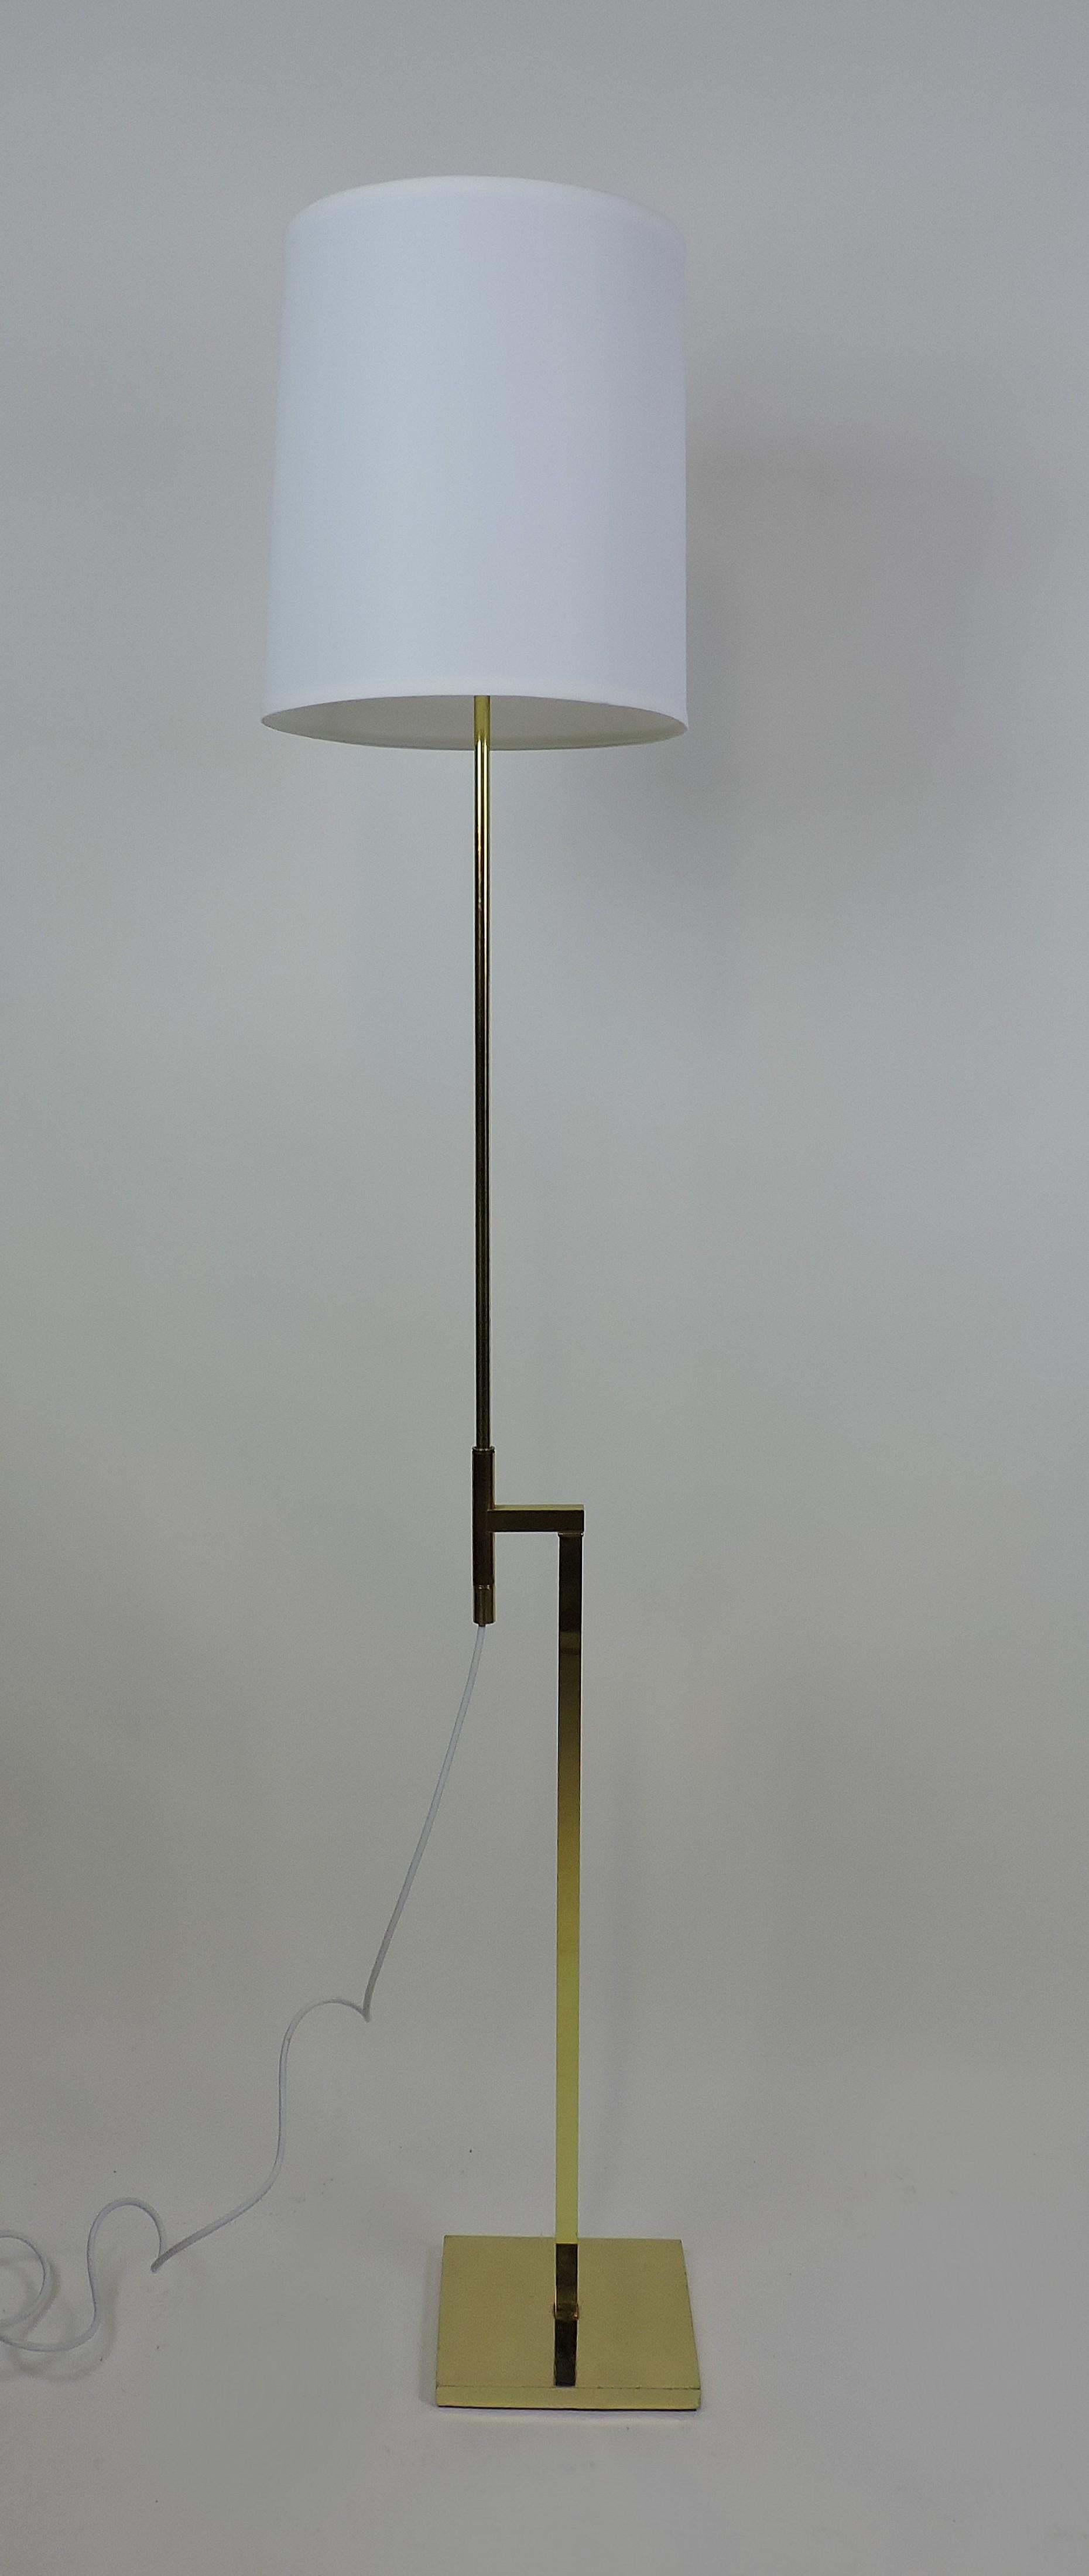 Minimalist style adjustable floor lamp by high quality lighting manufacturer, Laurel Lamp Company. This lamp has a great modernist look and extends from 43